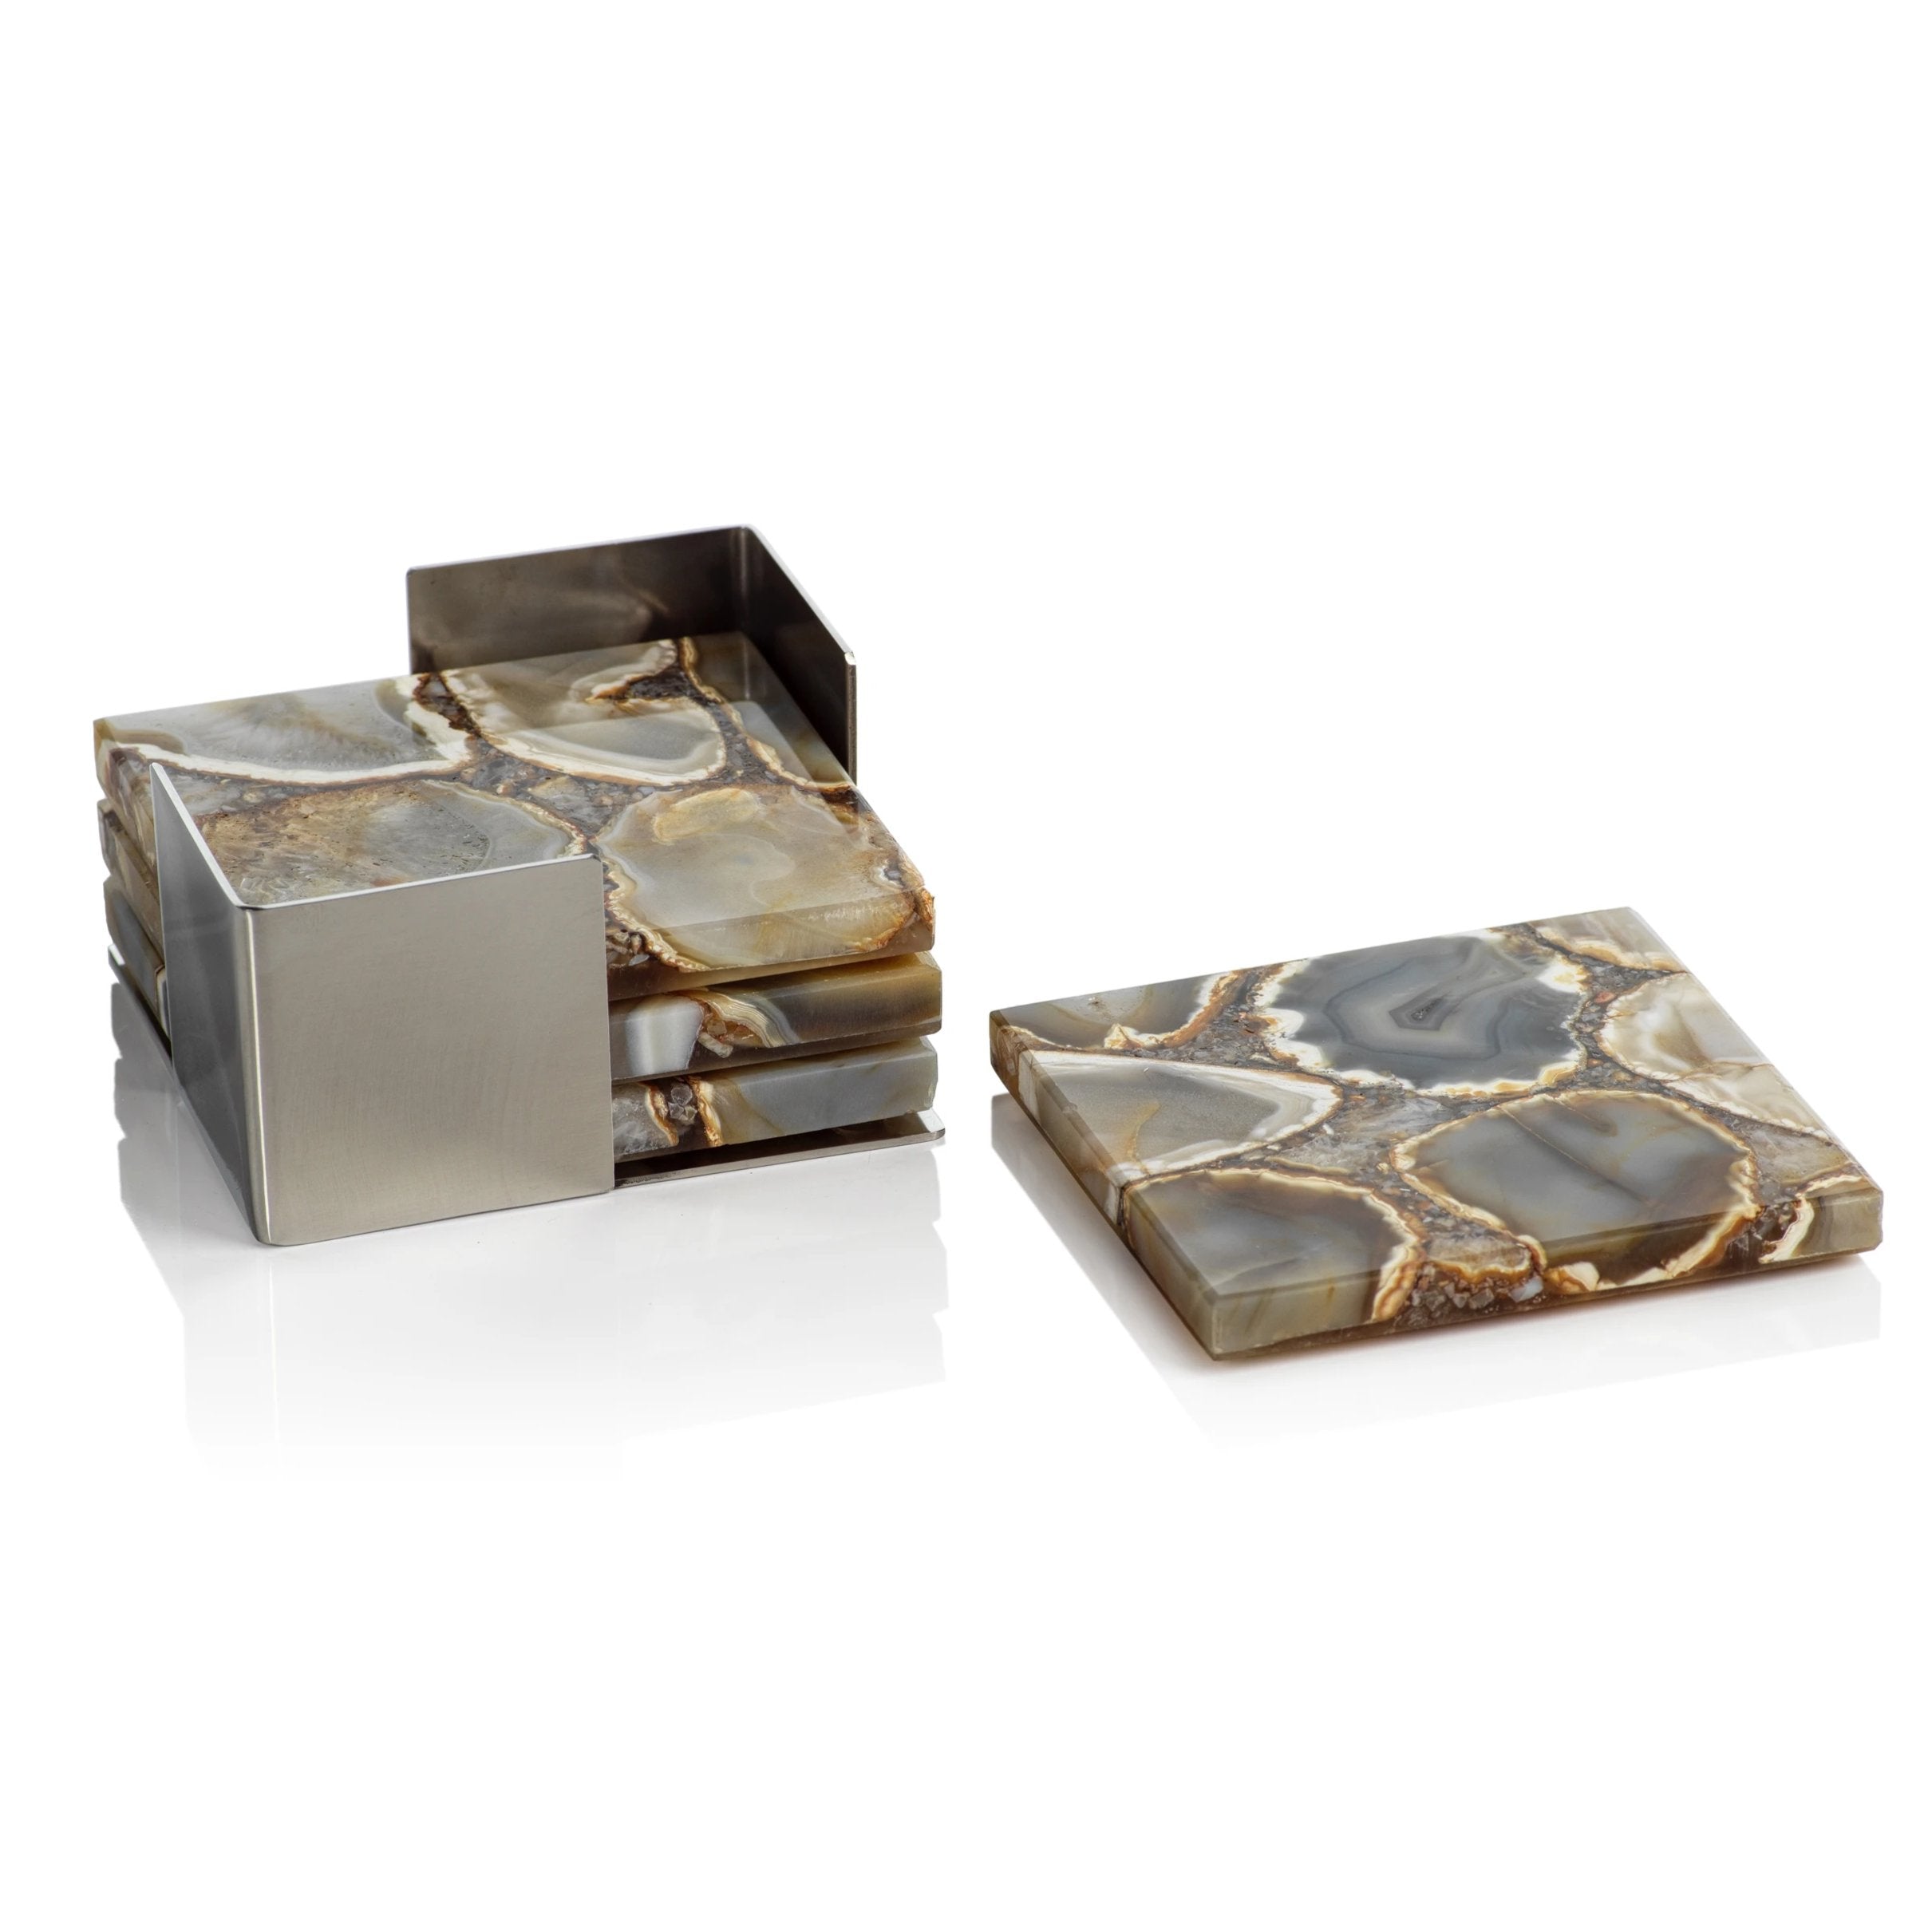 Set/4 Crete Agate Coasters on Metal Tray - Taupe/Brown - CARLYLE AVENUE